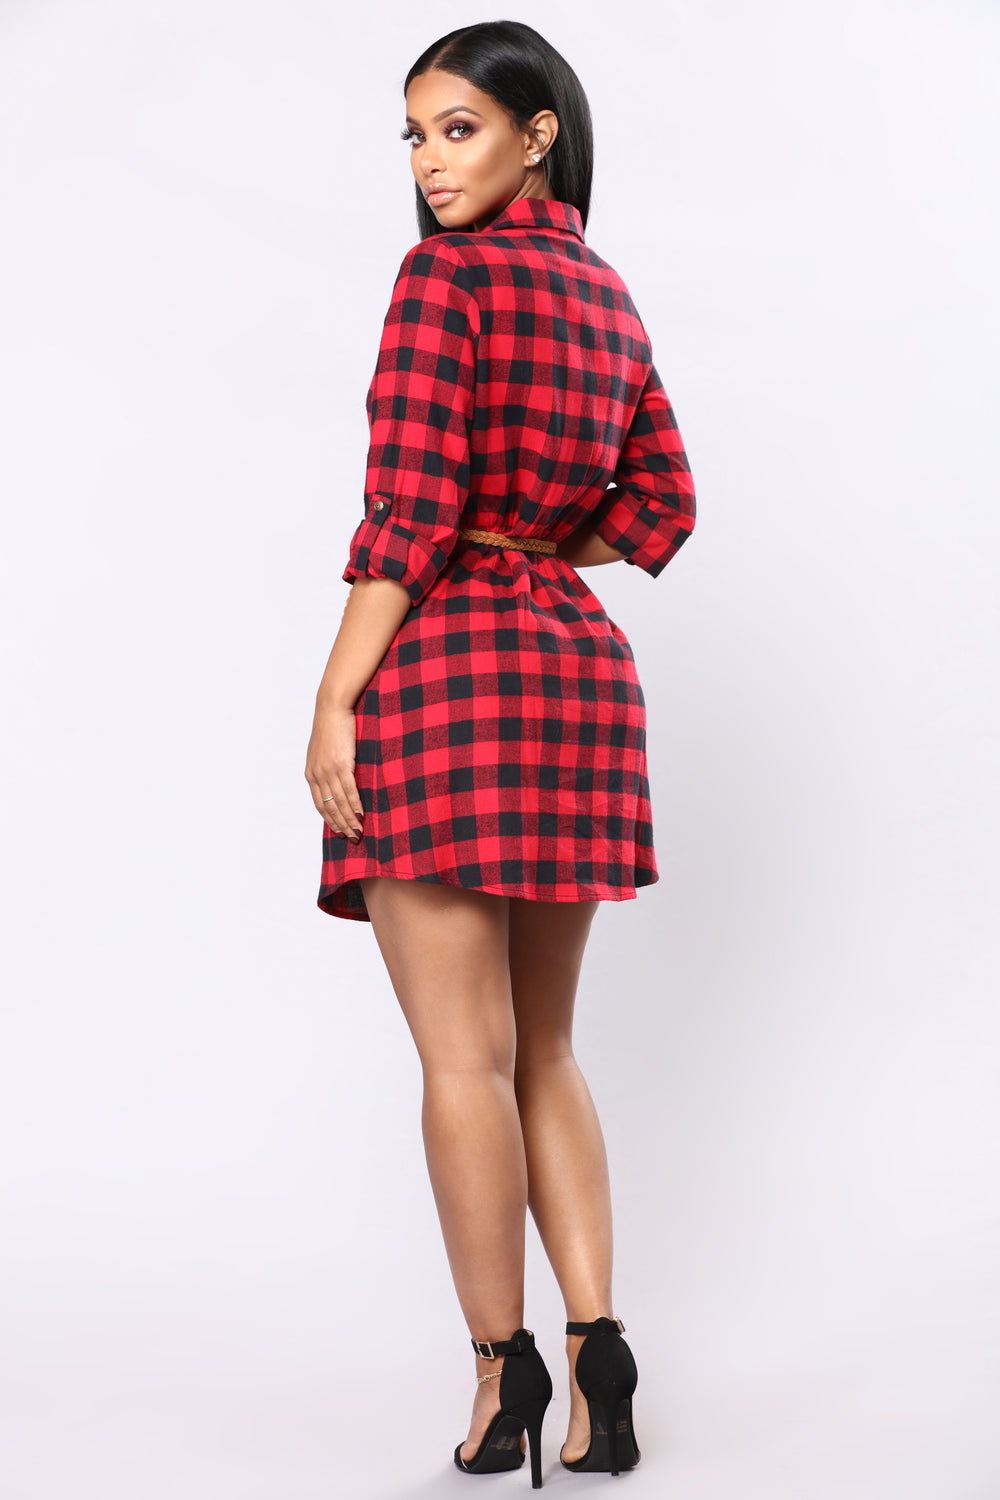 Small Town Visit Gingham Tunic - Red/Black